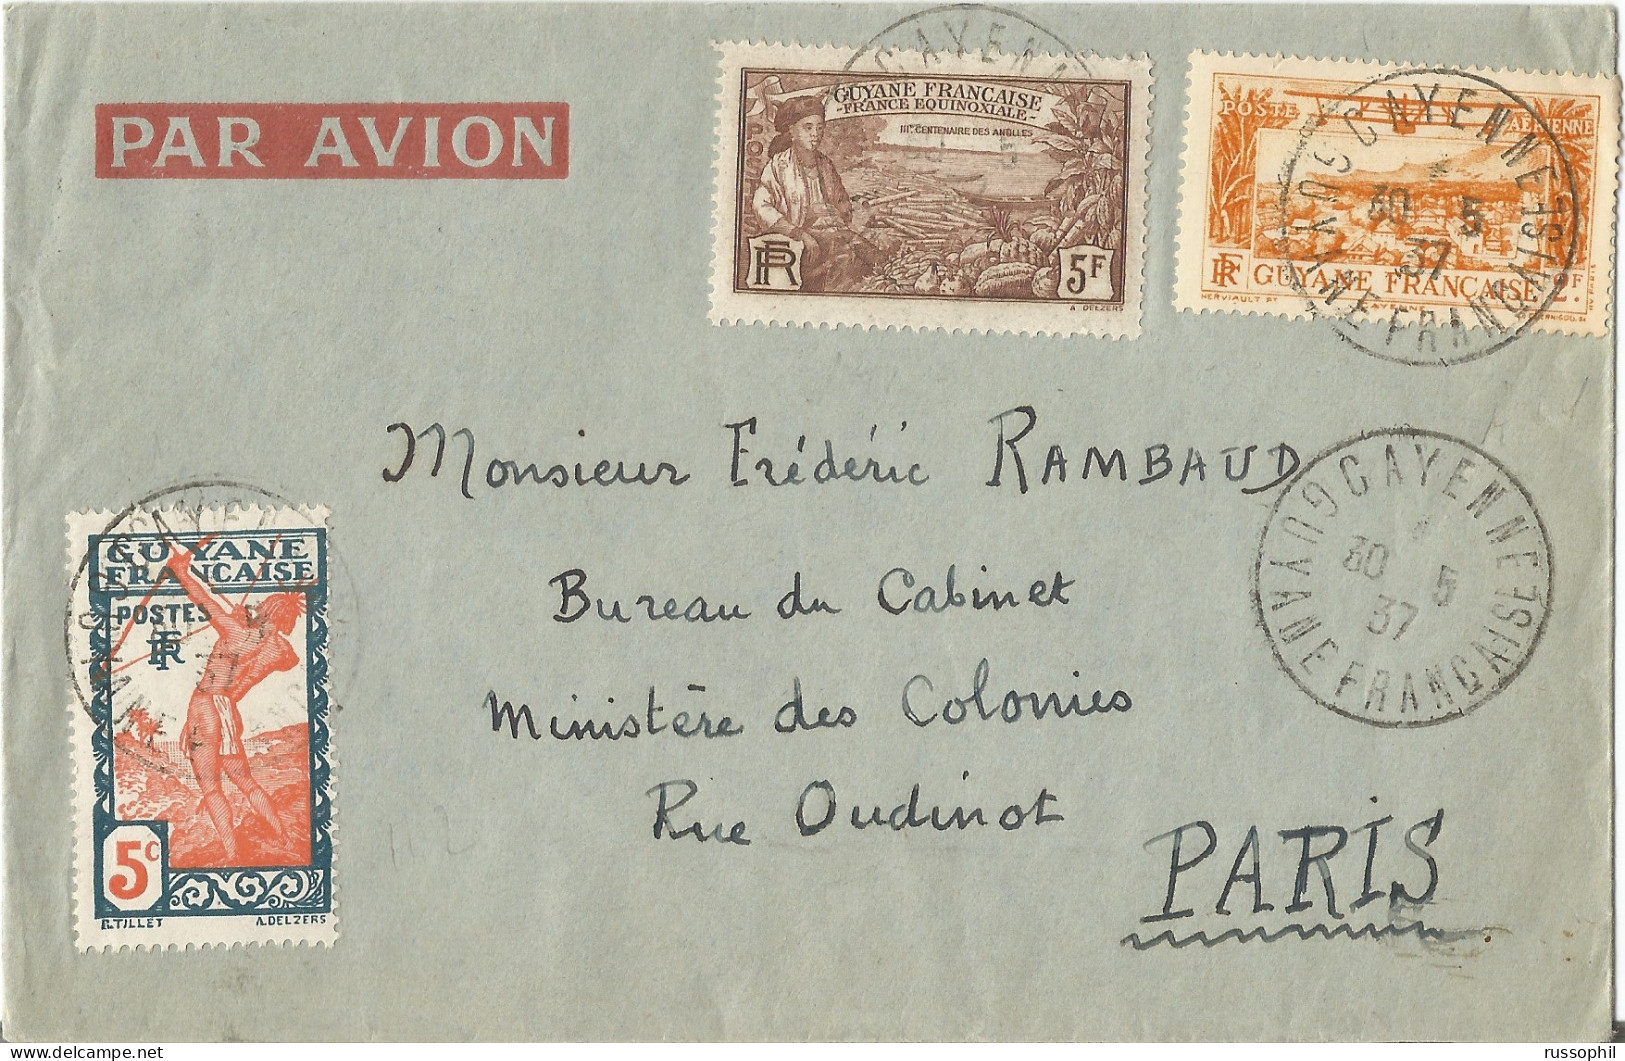 GUYANE - 7 FR.  5 CENT. FRANKING ON AIR MAILED COVER FROM CAYENNE TO FRANCE - 1937 - Storia Postale